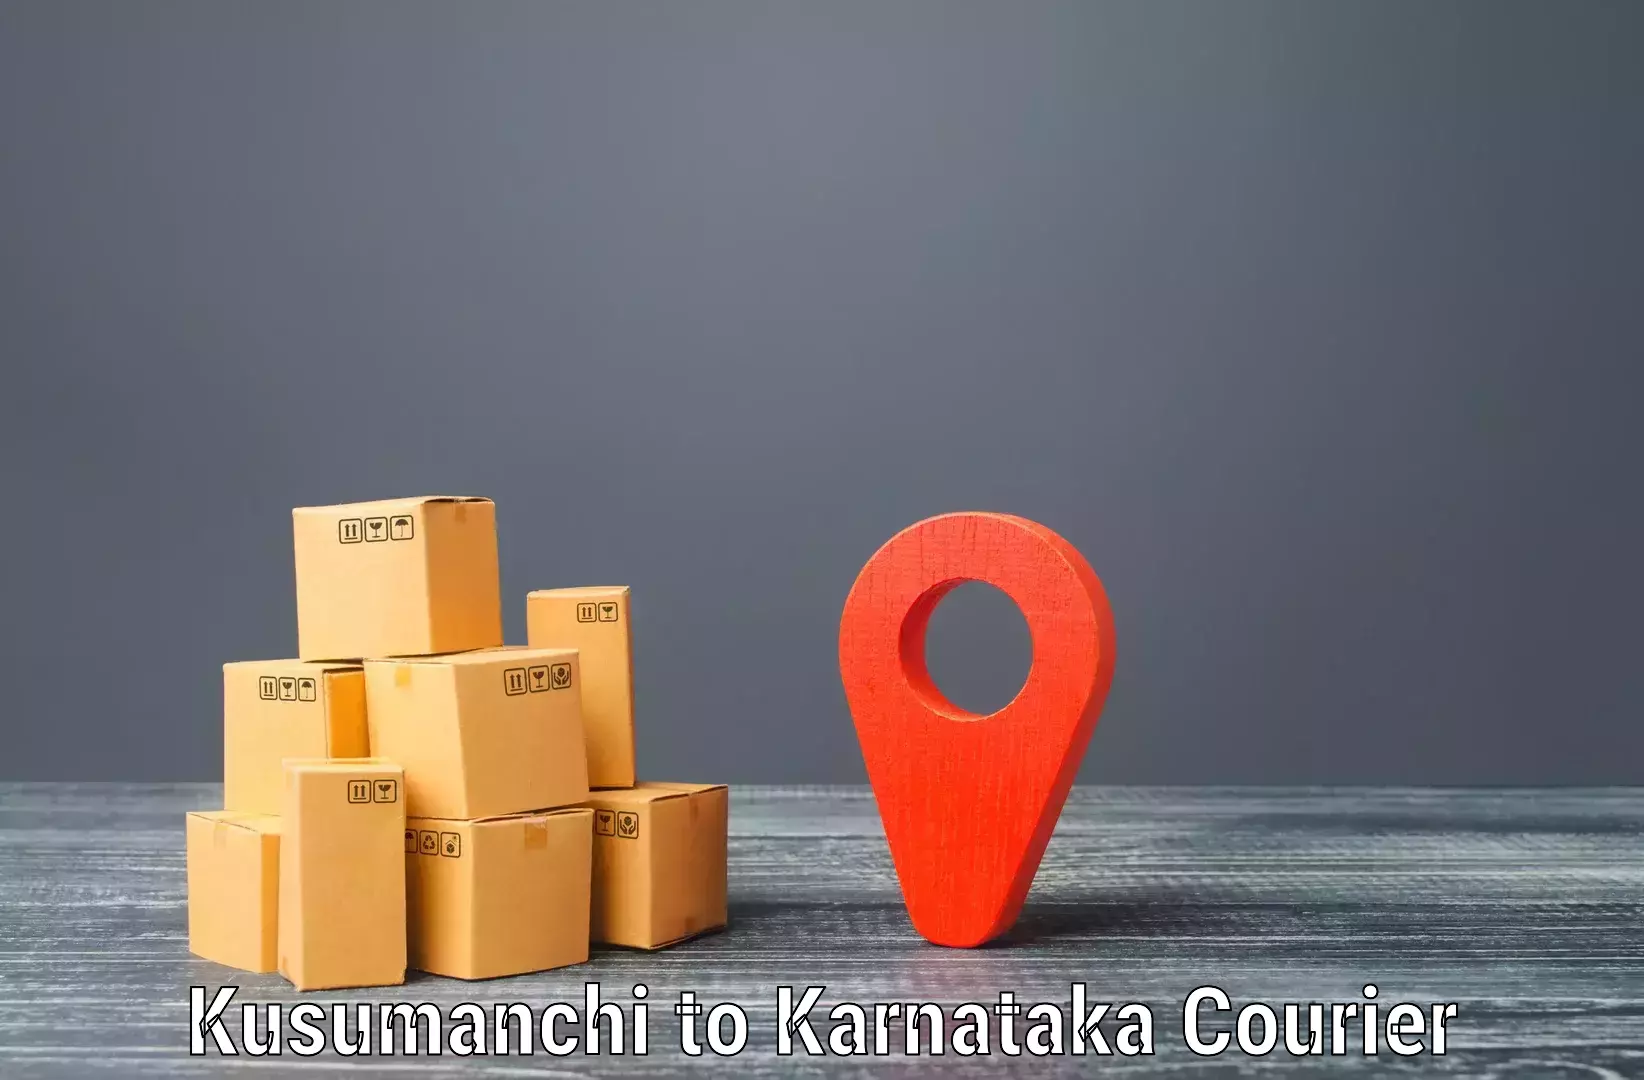 Multi-service courier options in Kusumanchi to yedrami